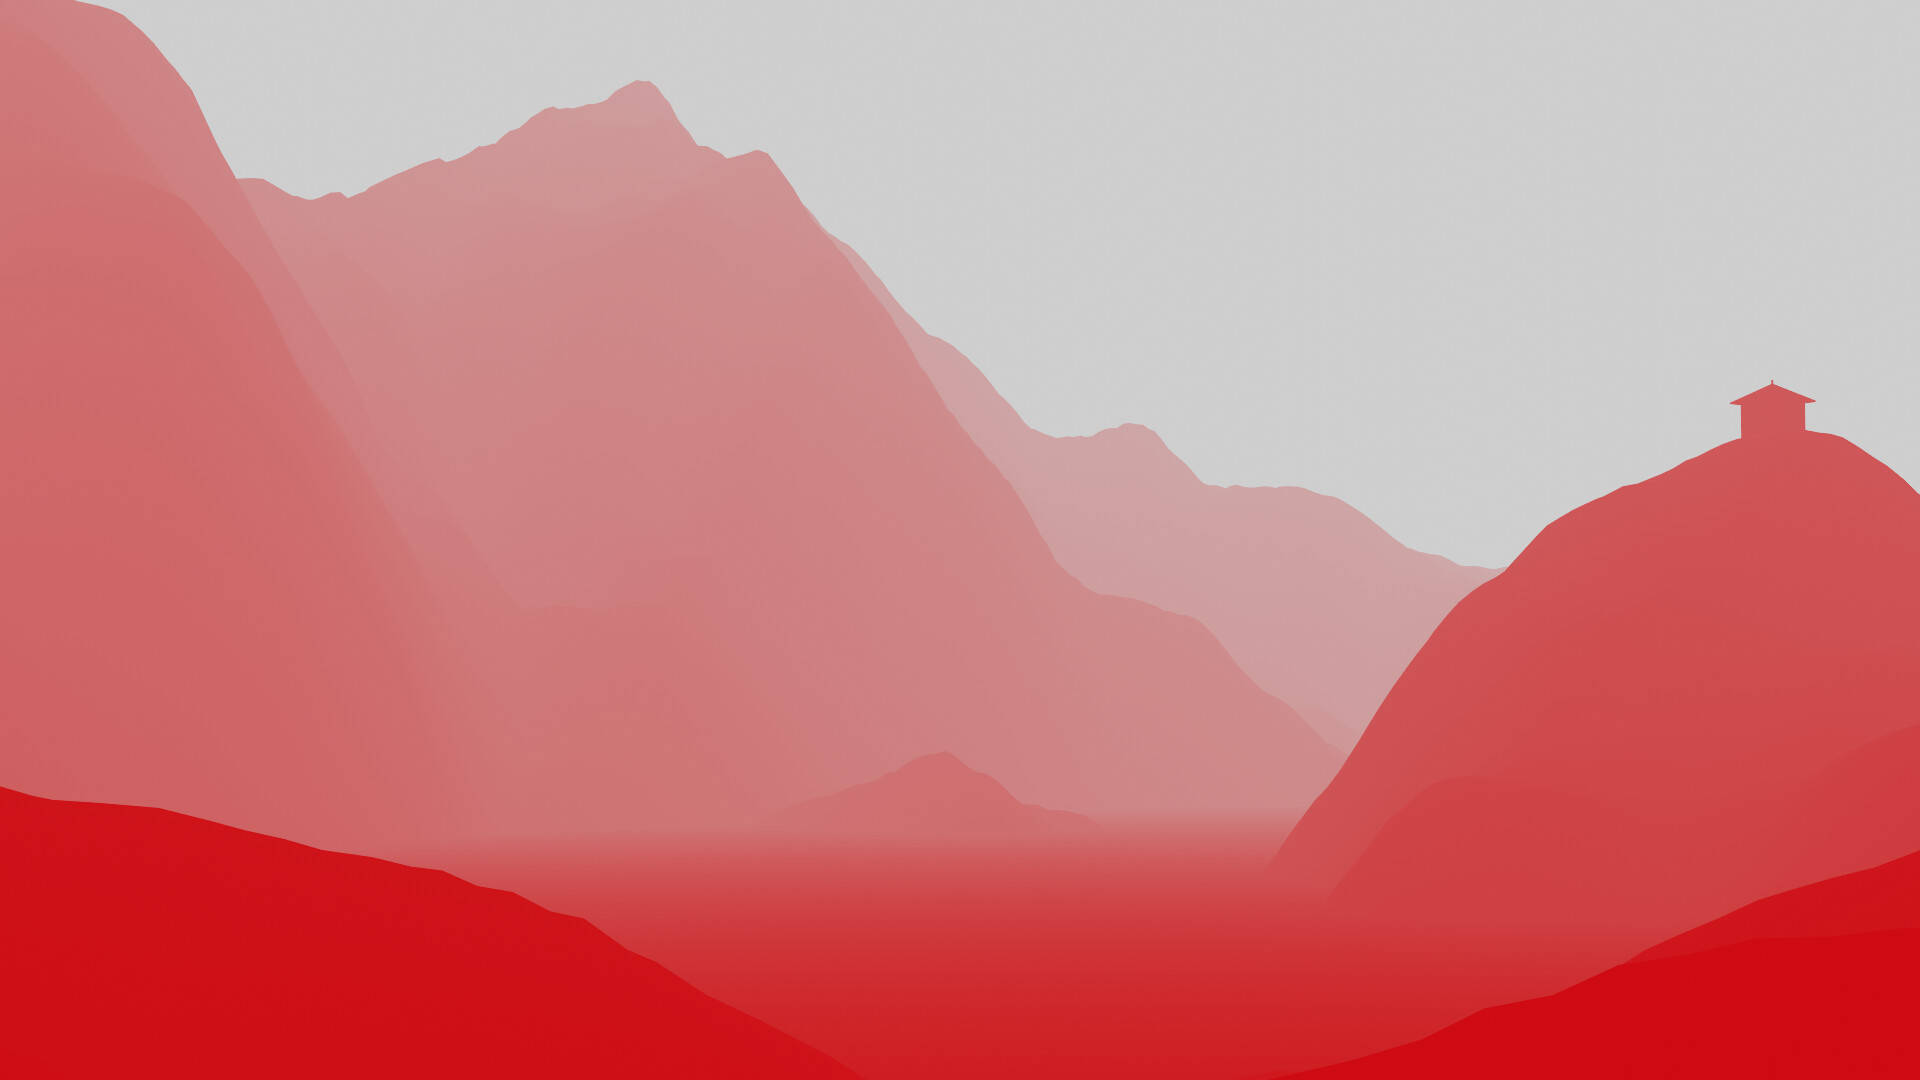 Download NiceSimple Red Mountain Wallpaper